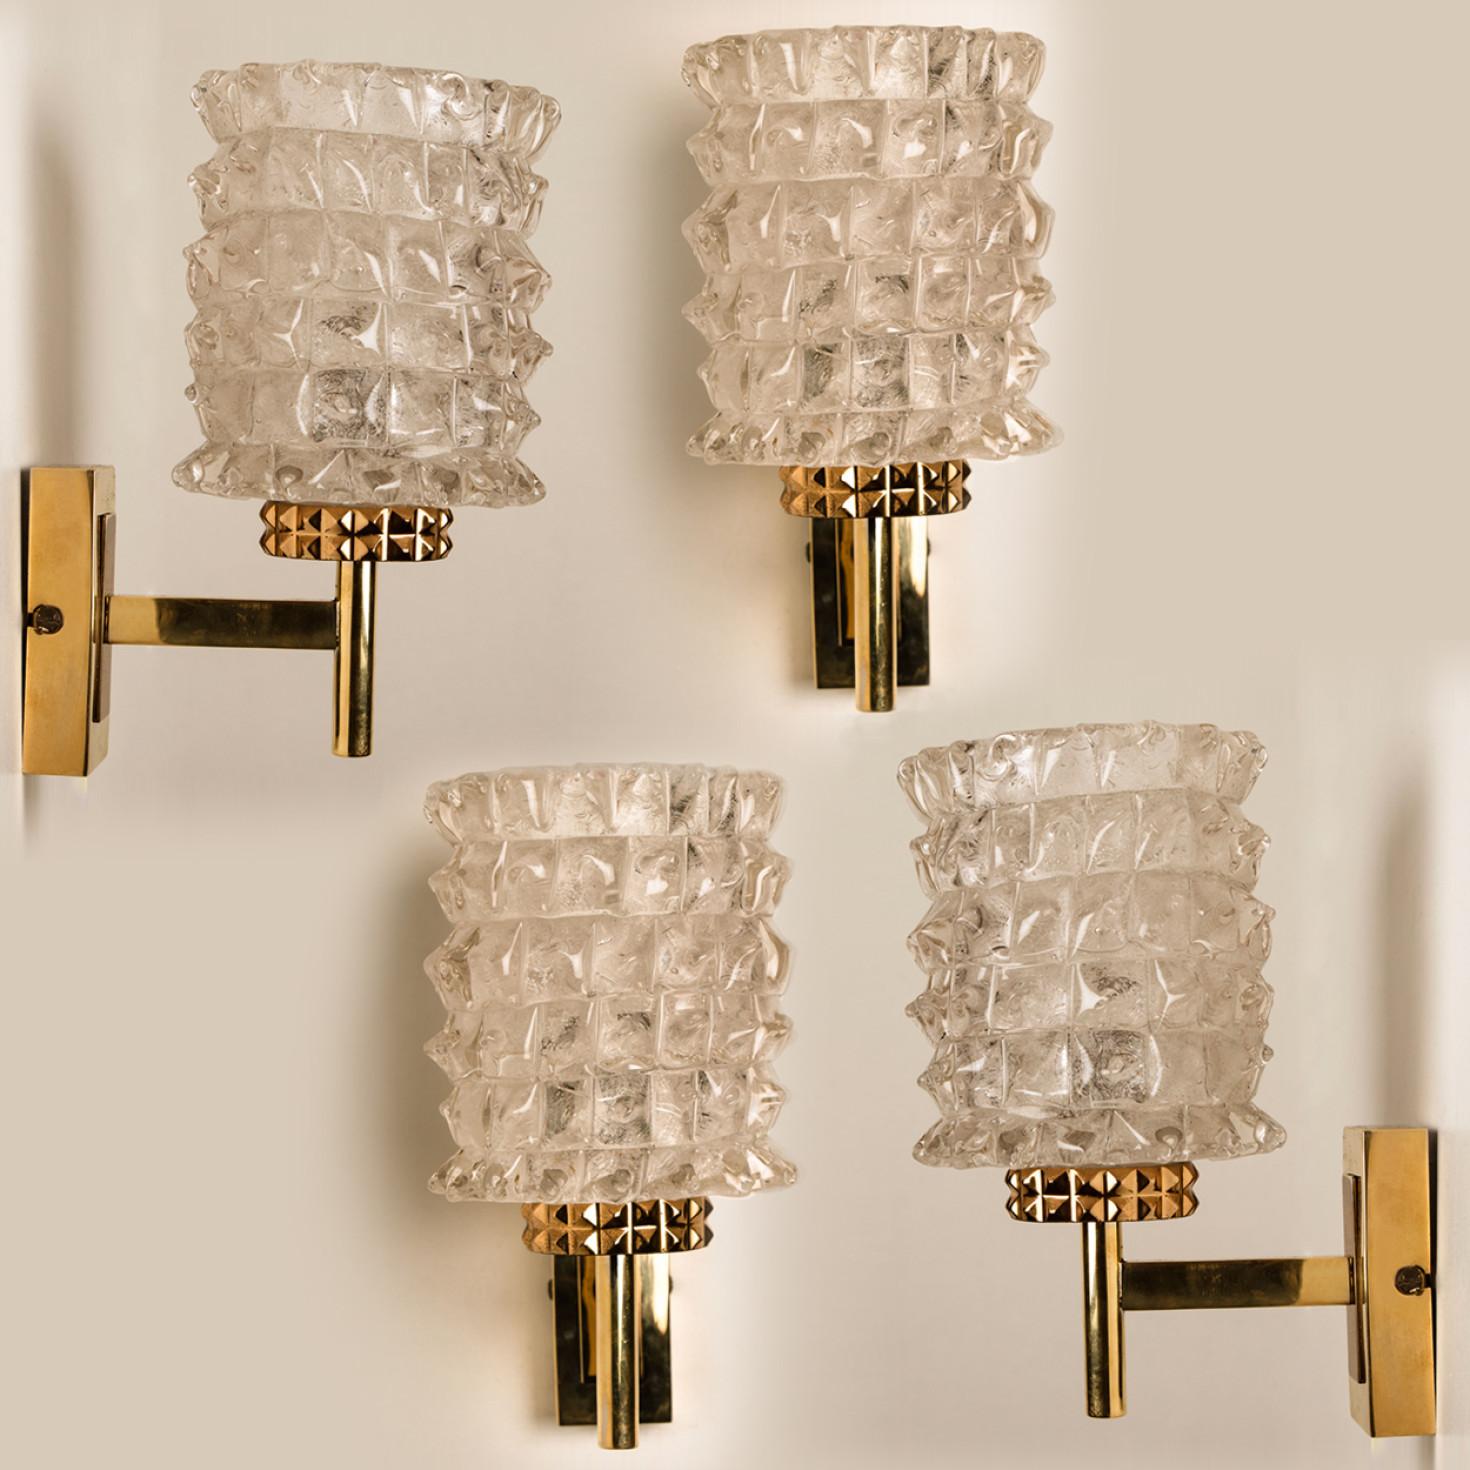 Clean lines to complement all decors. A wonderful high-end Hillebrand wall light fixture with brass details and thick textured glass.

The wall sconce holds 1 E14 socket max 40 Watt. Also LED compatible.
The size: Depth 5,9 